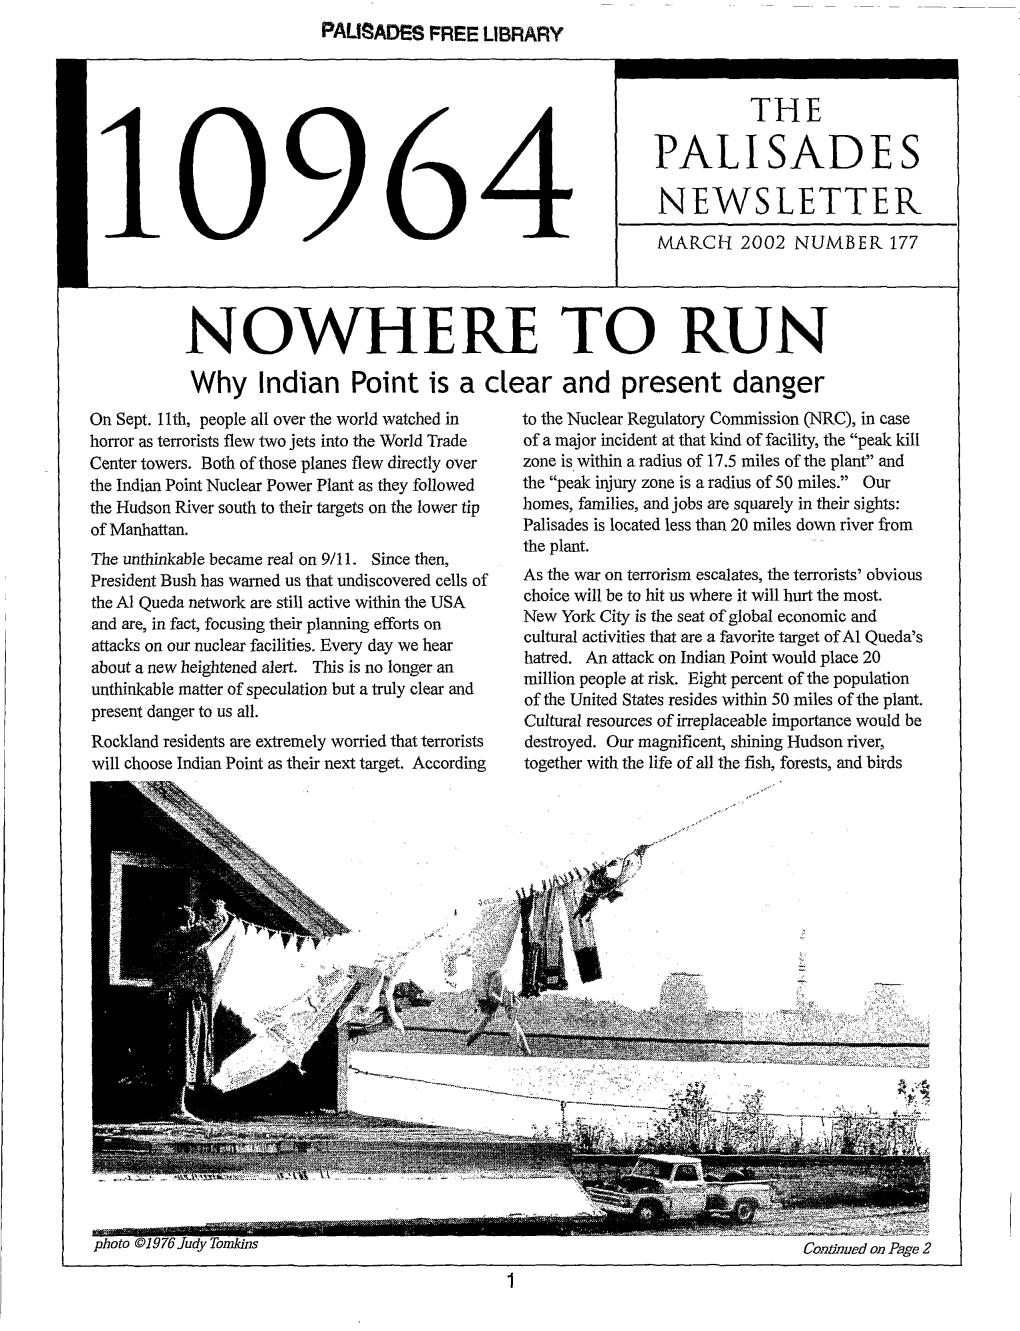 MARCH 2002 NUMBER 177 NOWHERE to RUN Why Indian Point Is a Clear and Present Danger on Sept